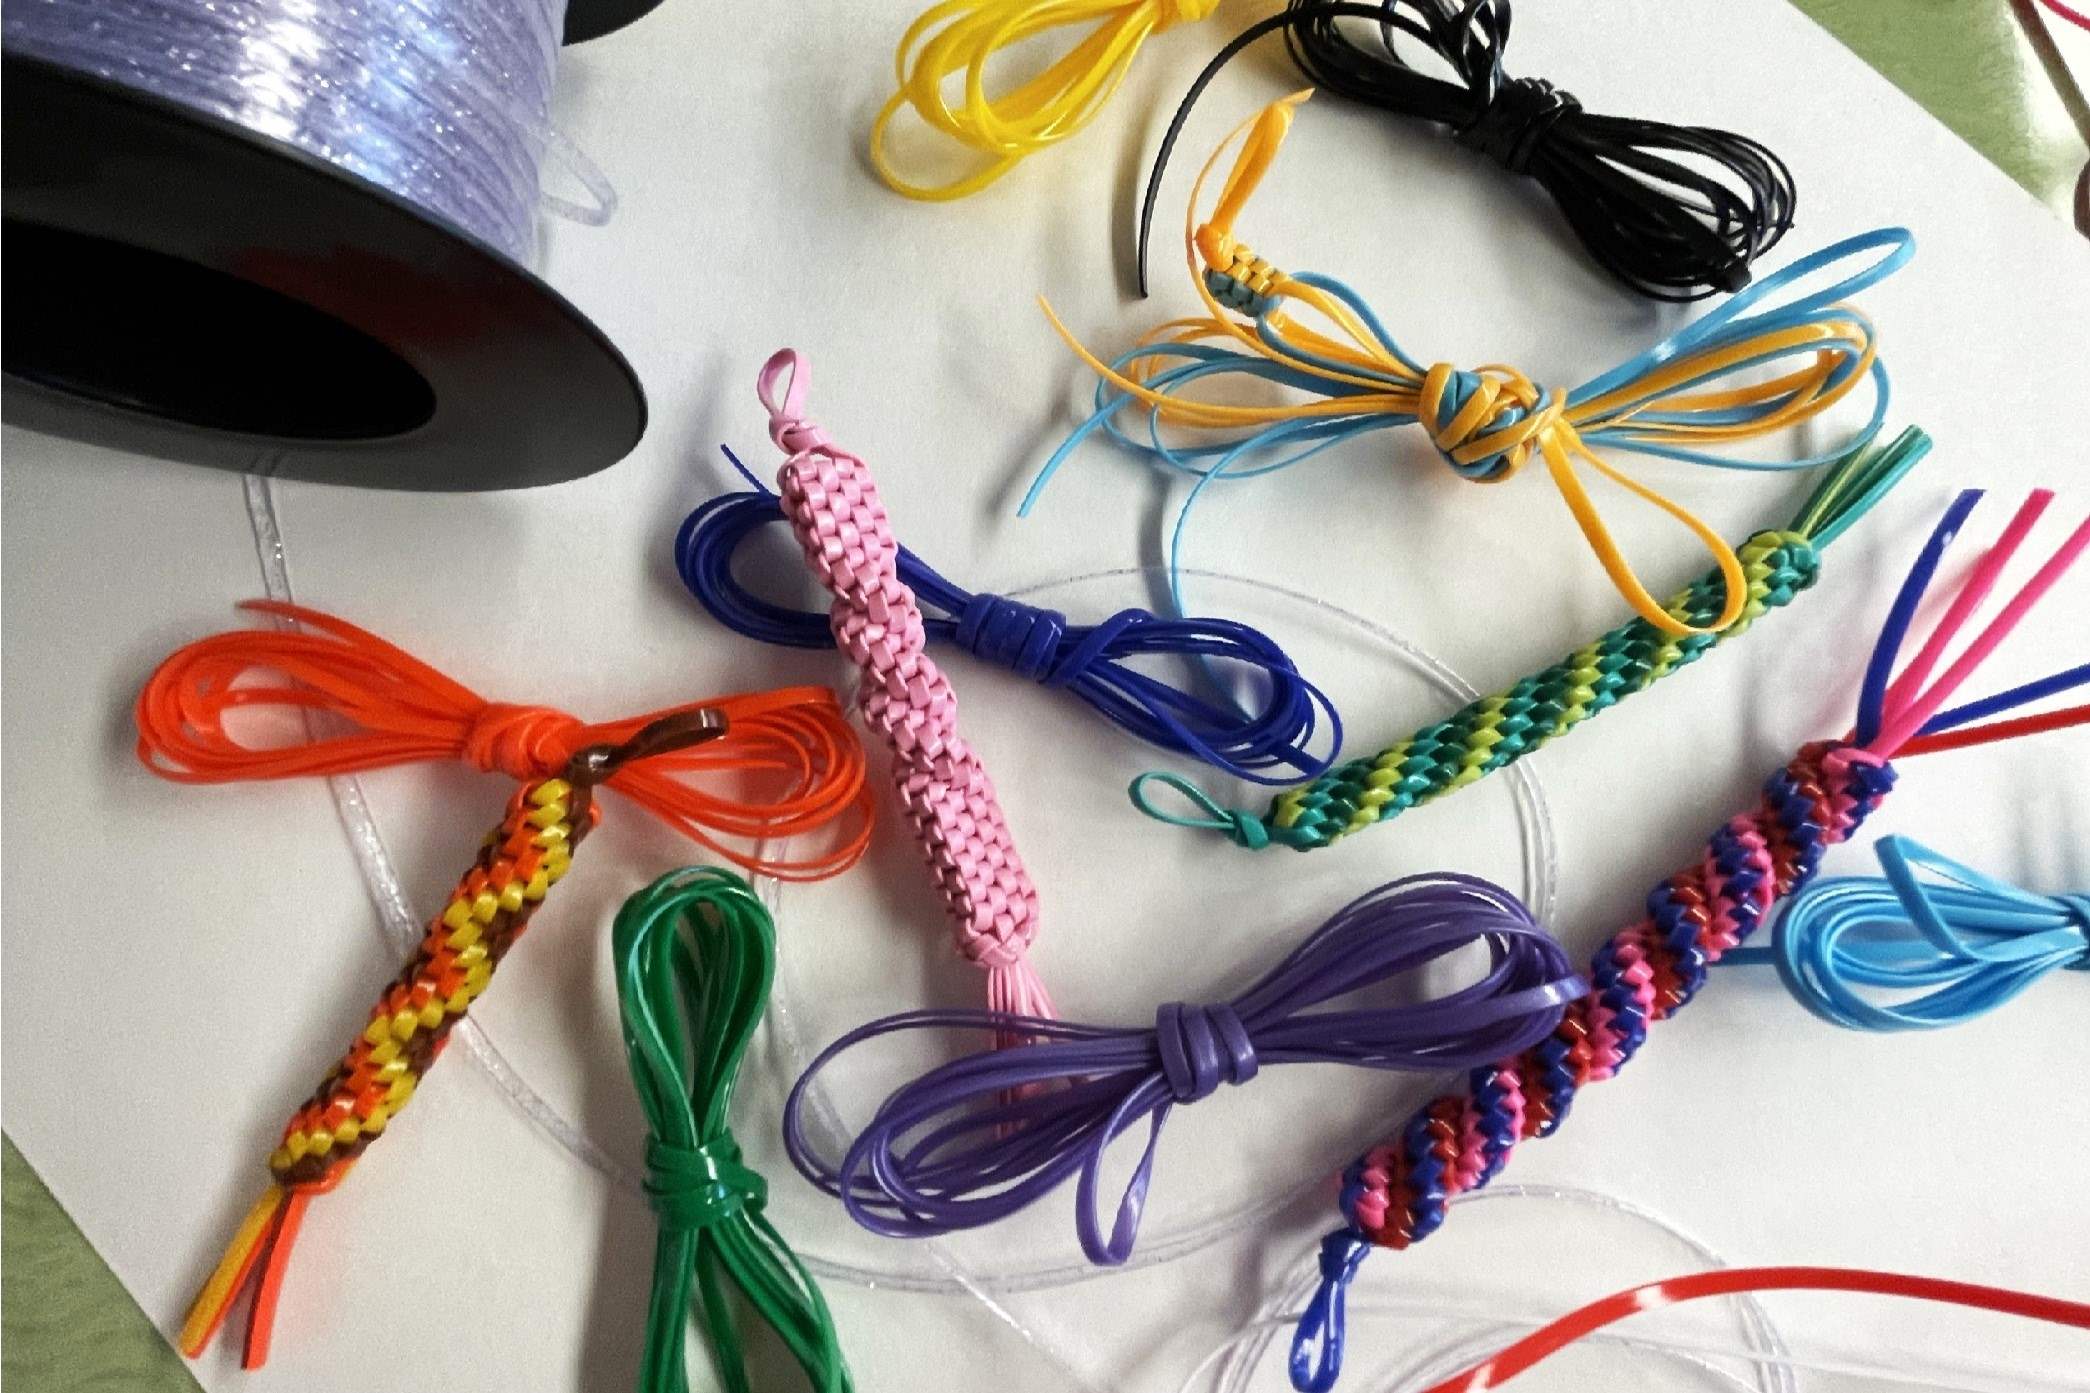 diy-crafting-creating-your-own-lanyard-with-ease